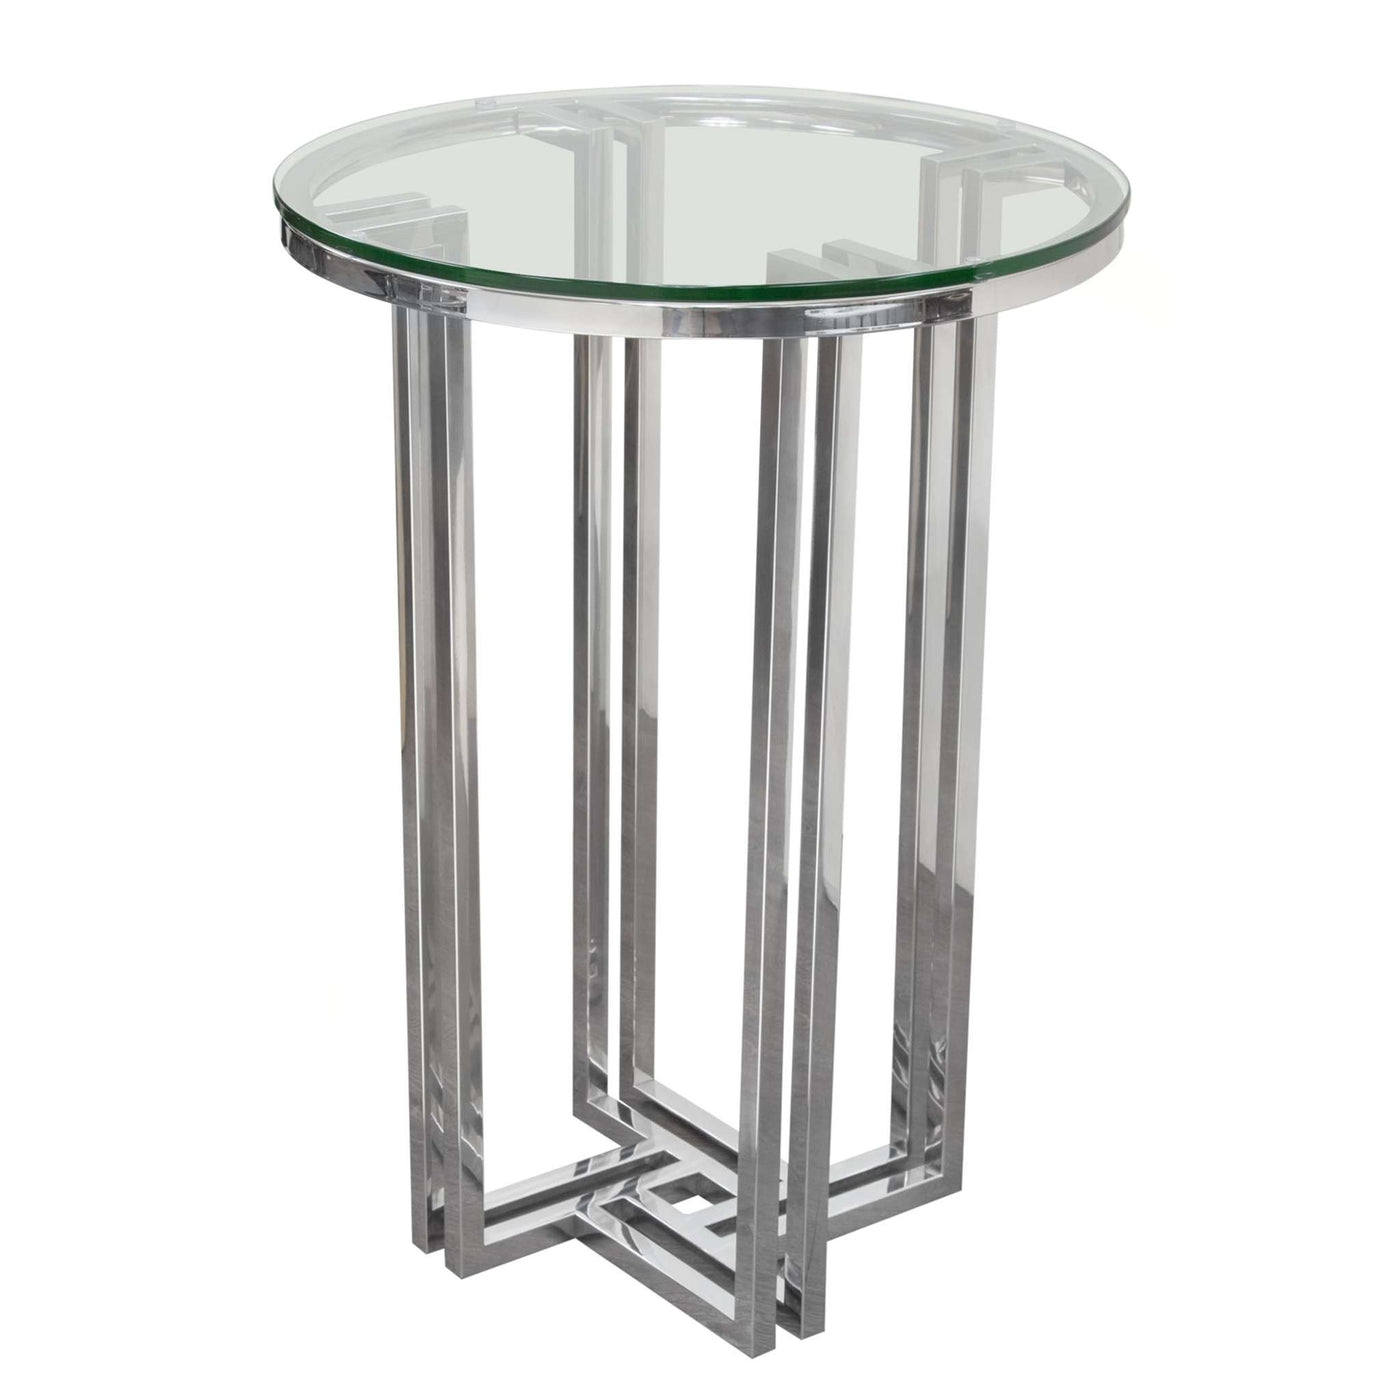 DEKO Polished Stainless Steel Round Accent Table w/ Clear, Tempered Glass Top by Diamond Sofa